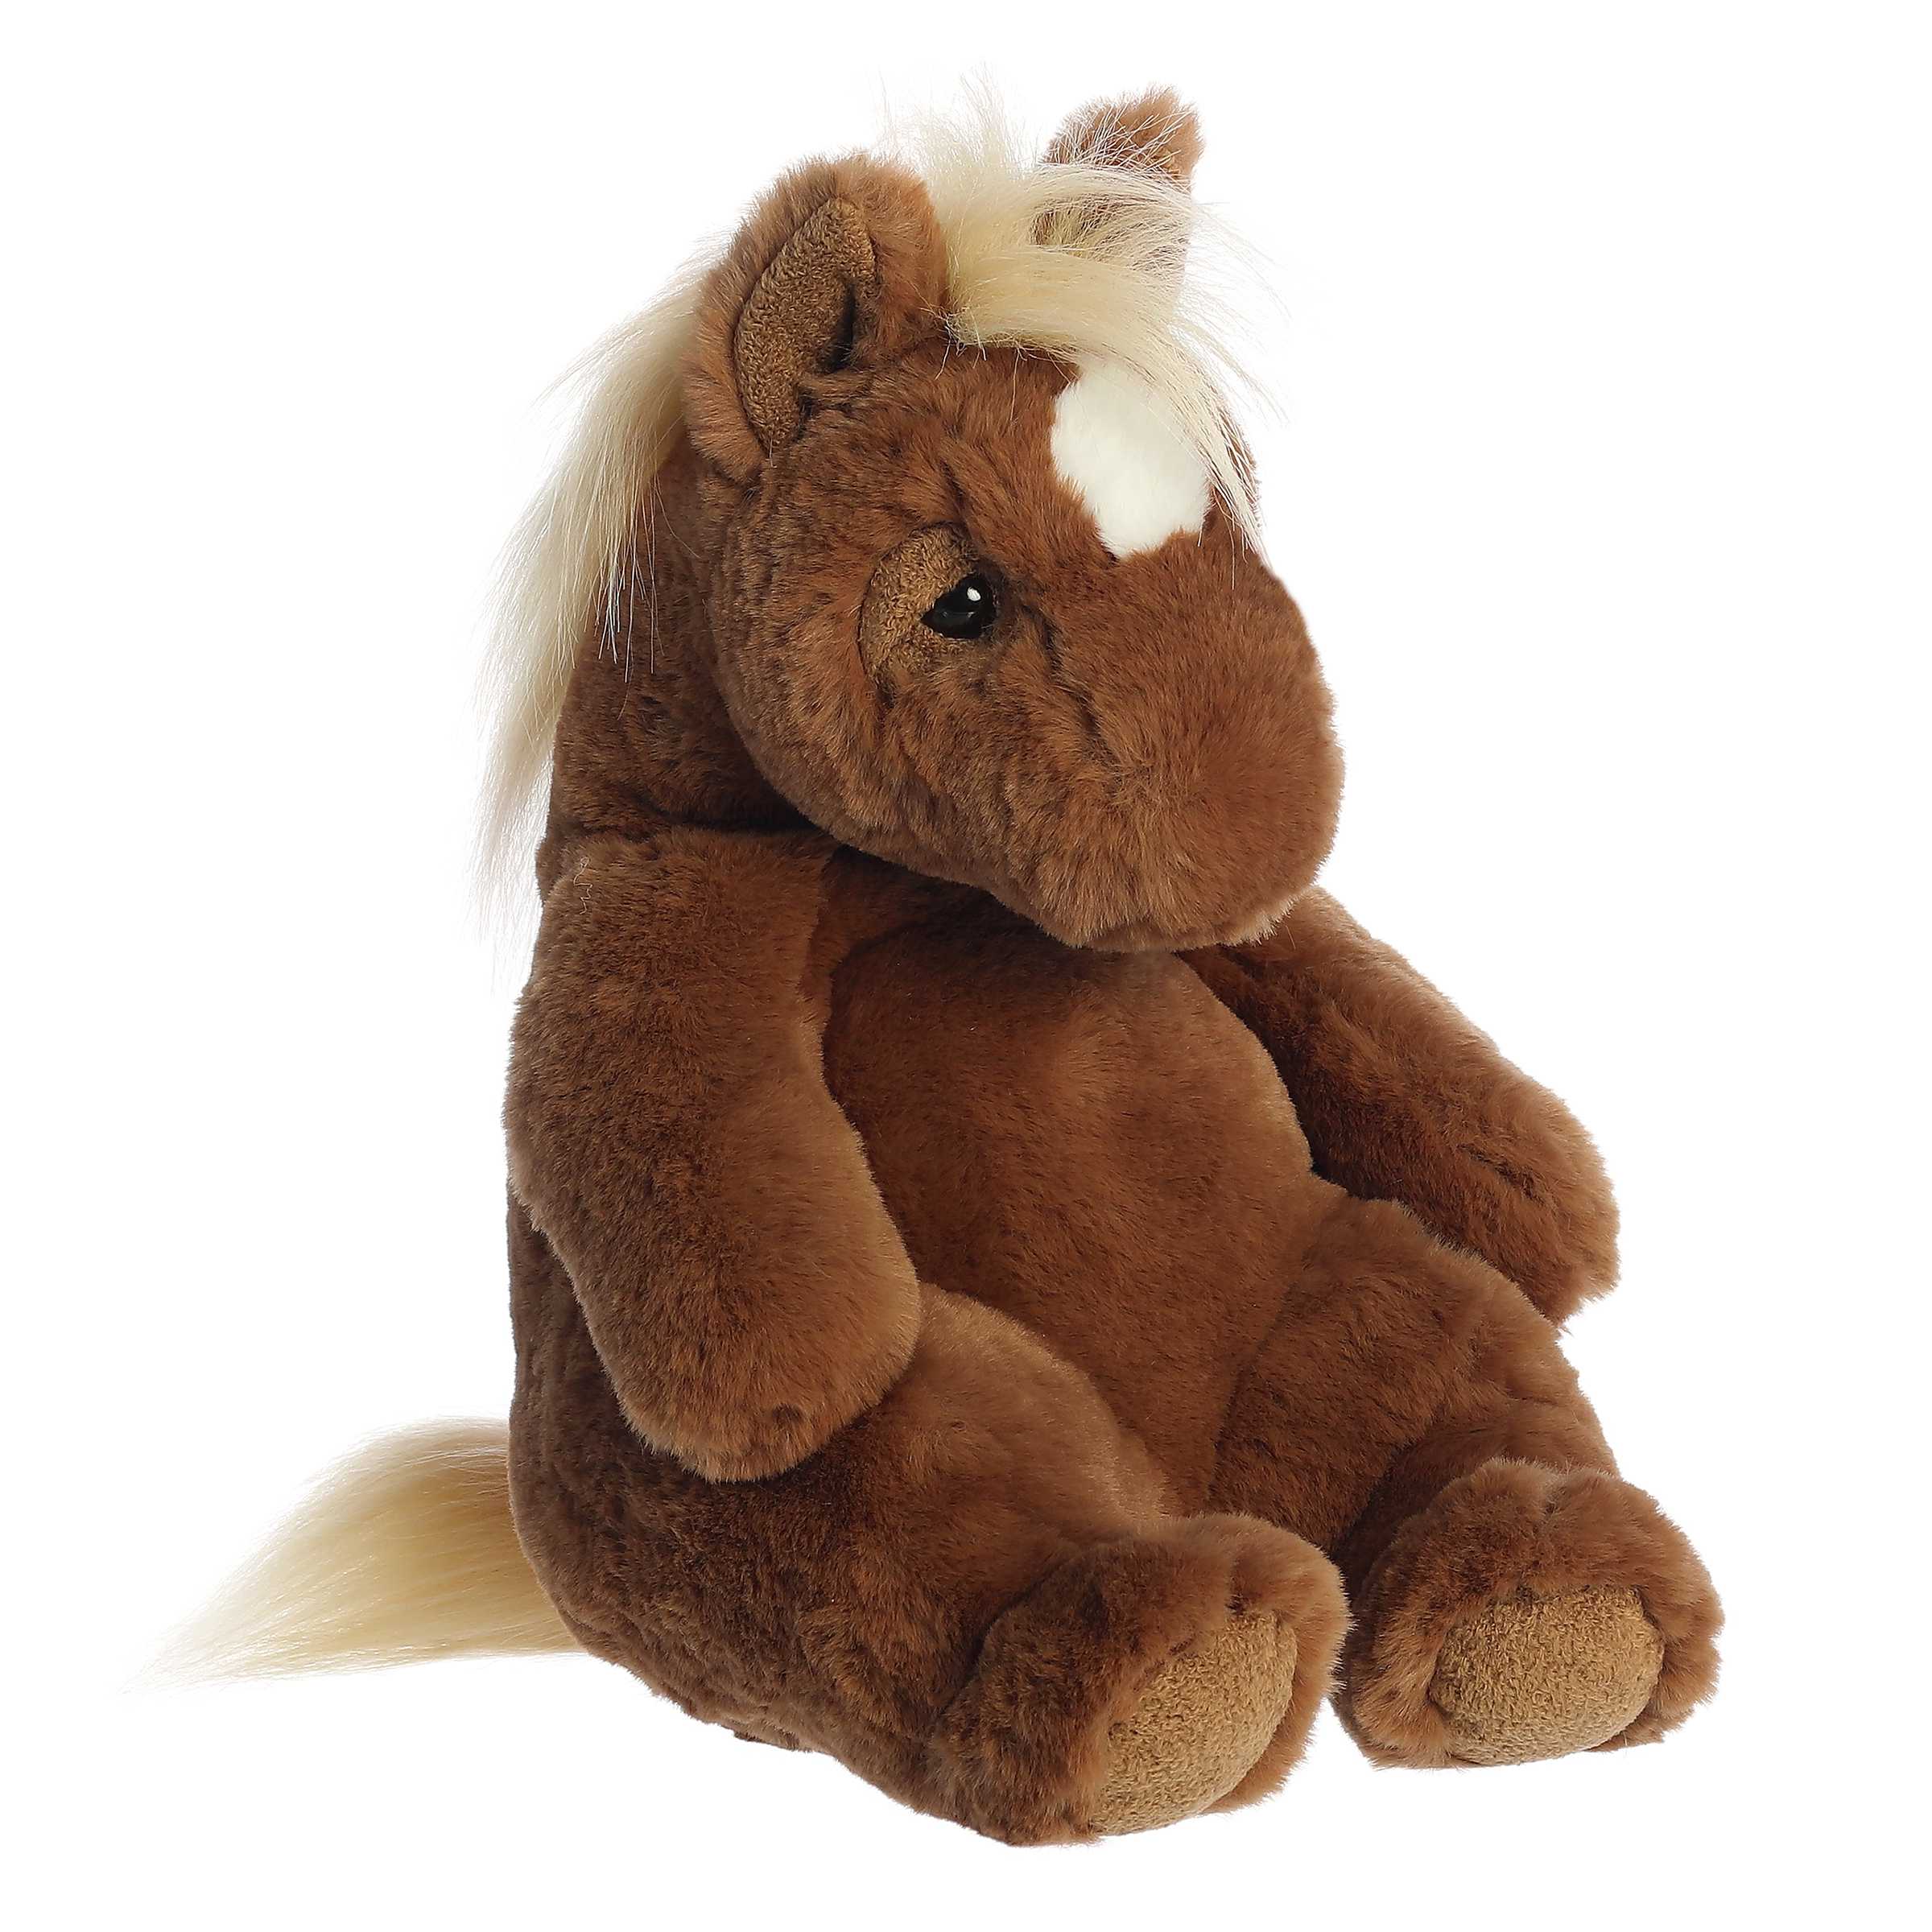 Chestnut stallion plush with soft brown fur, flowing blond mane, gentle eyes, and a relaxed posture, by Aurora plush.
